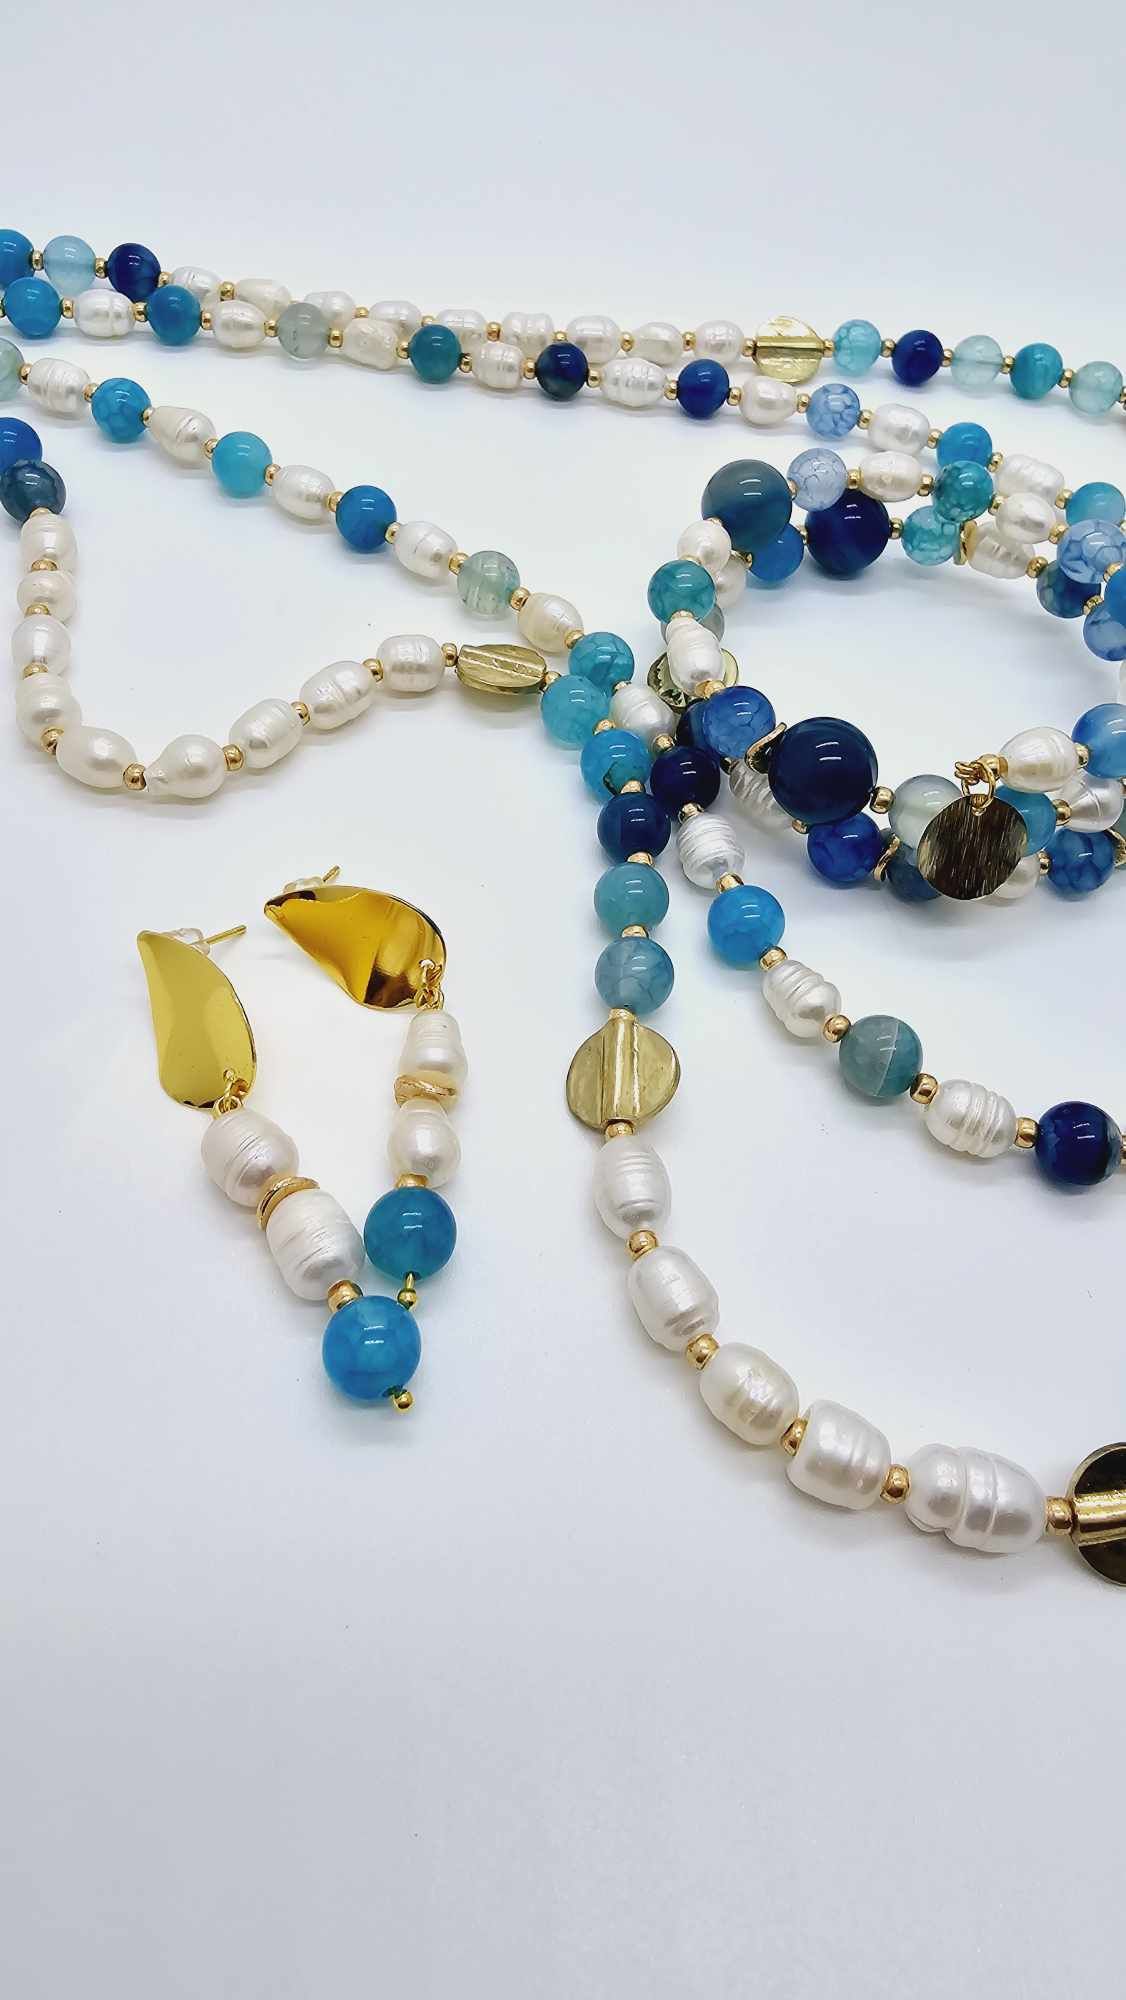 Lake blue agate and freshwater pearl necklace set! (1244 Influencer)